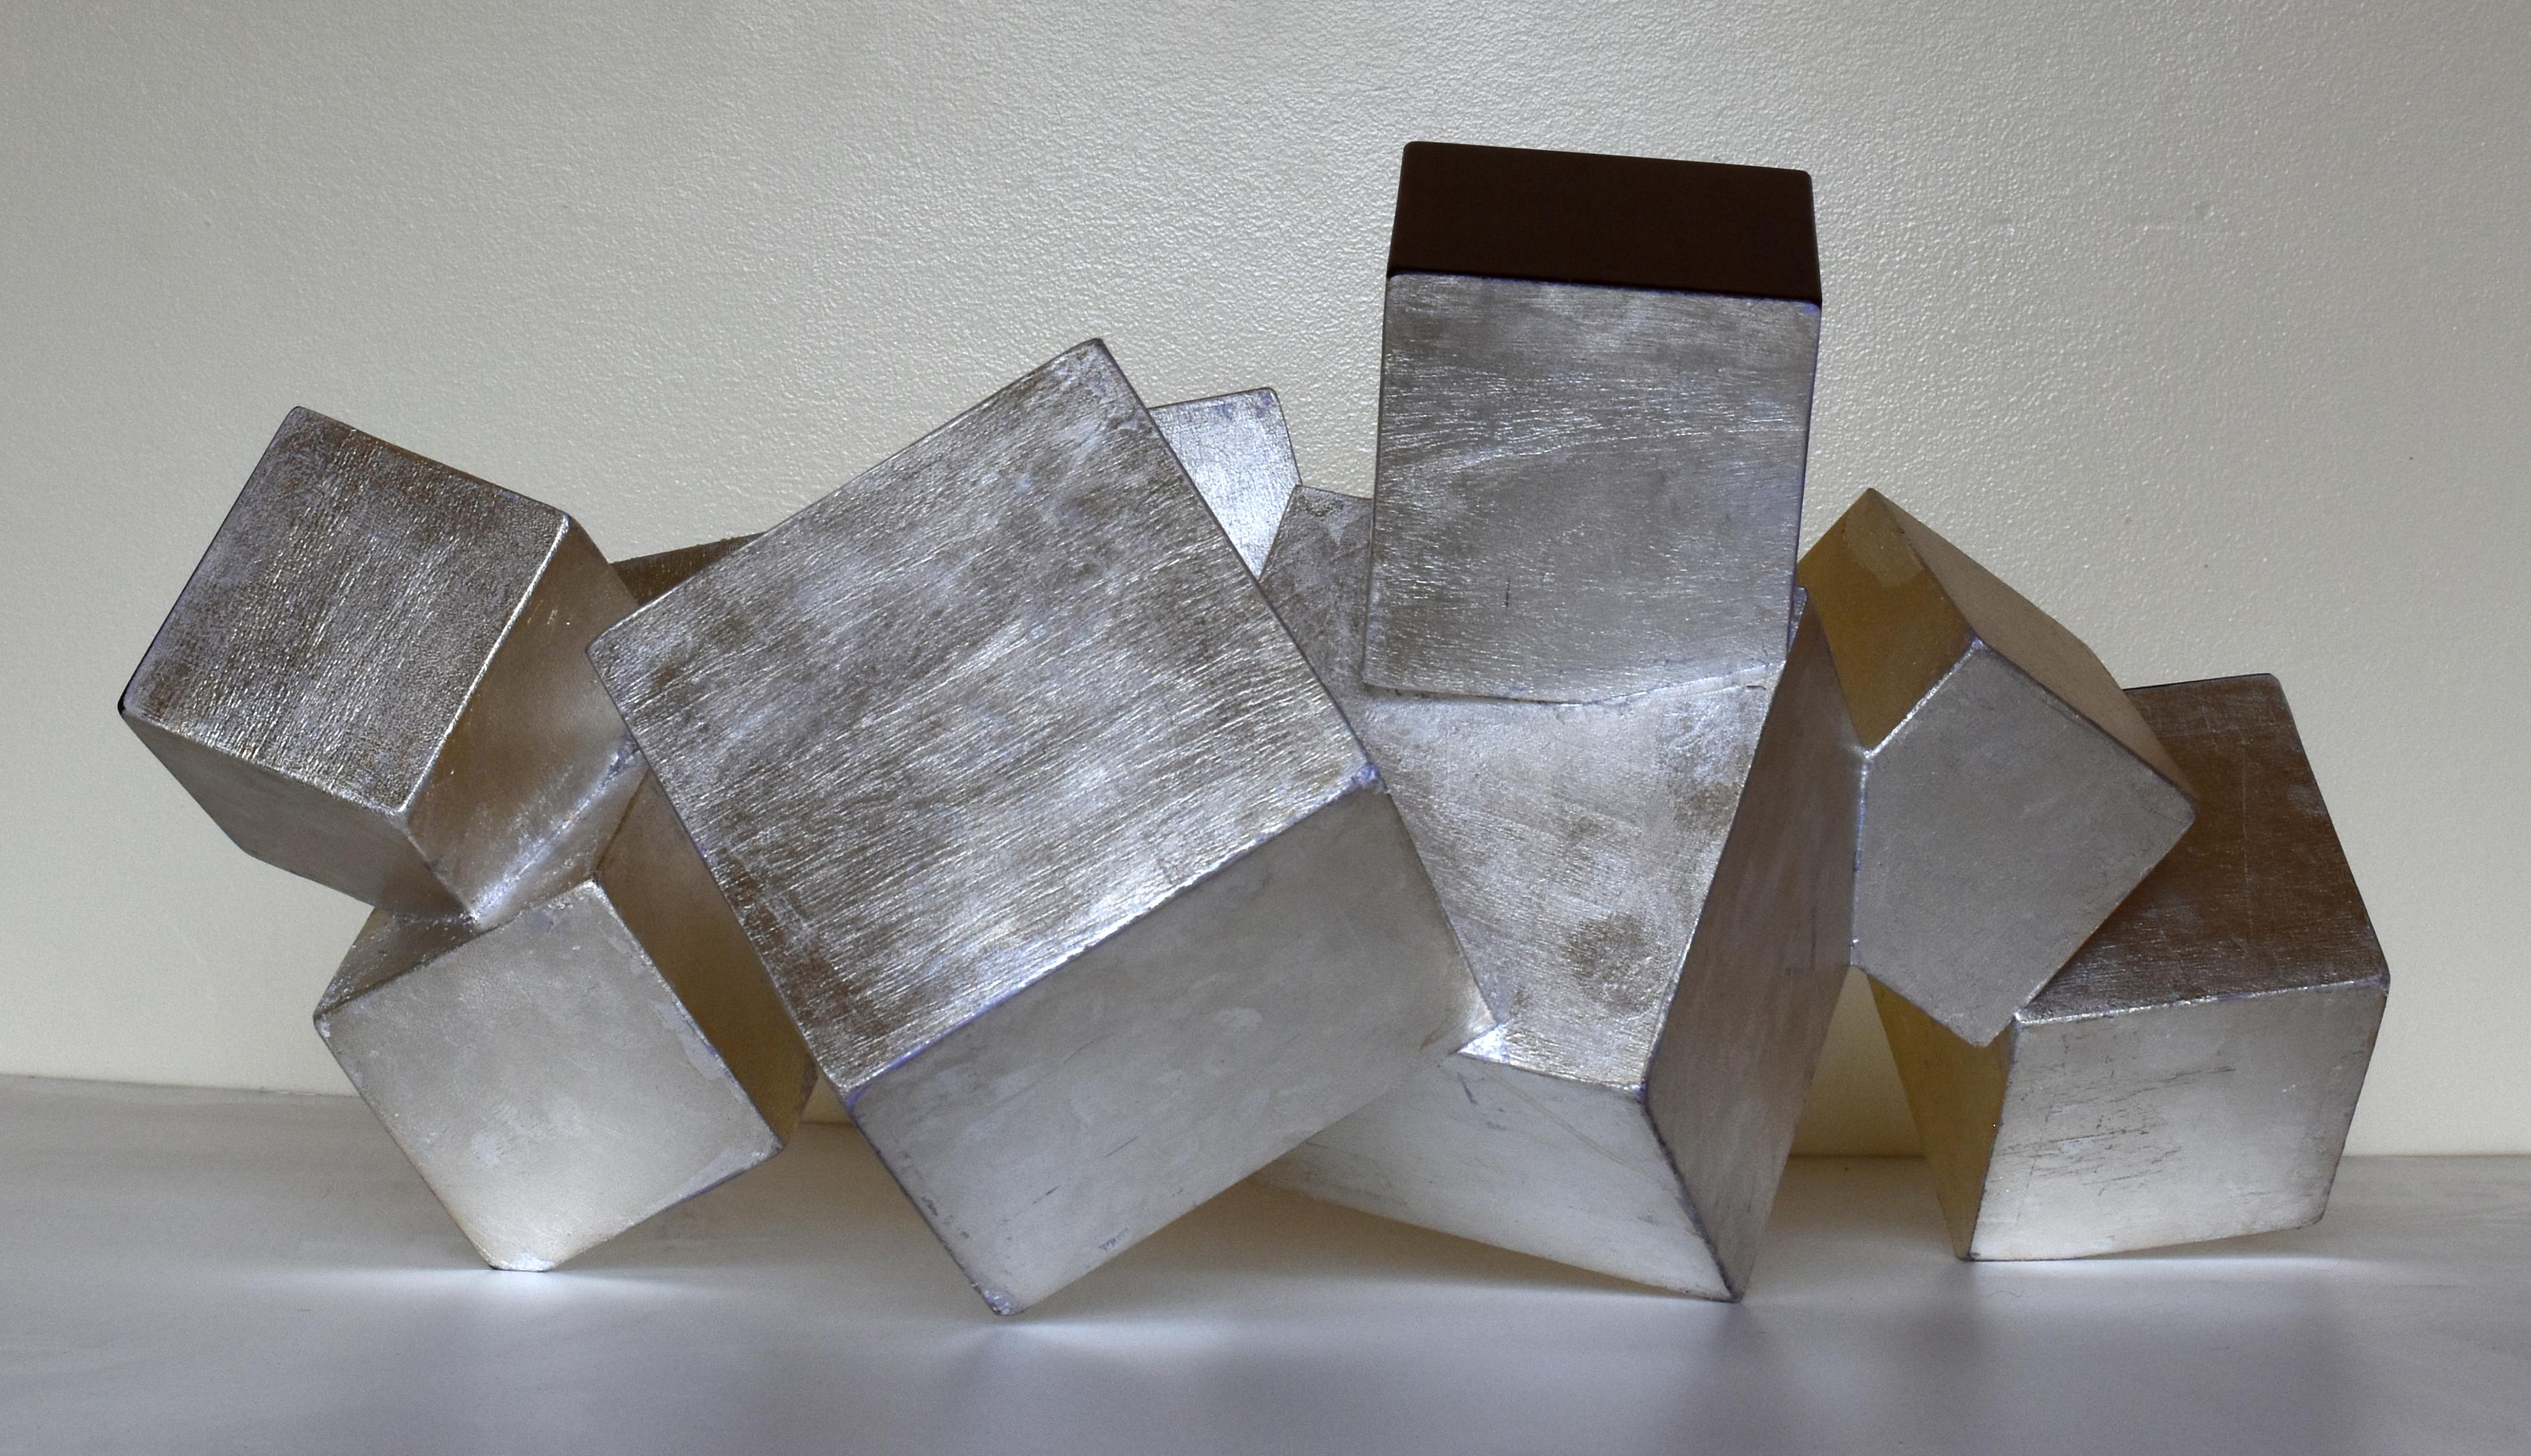 Sterling Silver and Purpleheart Pyrite (wood tabletop sculpture, metallic, cubic - Abstract Geometric Mixed Media Art by Chloe Hedden